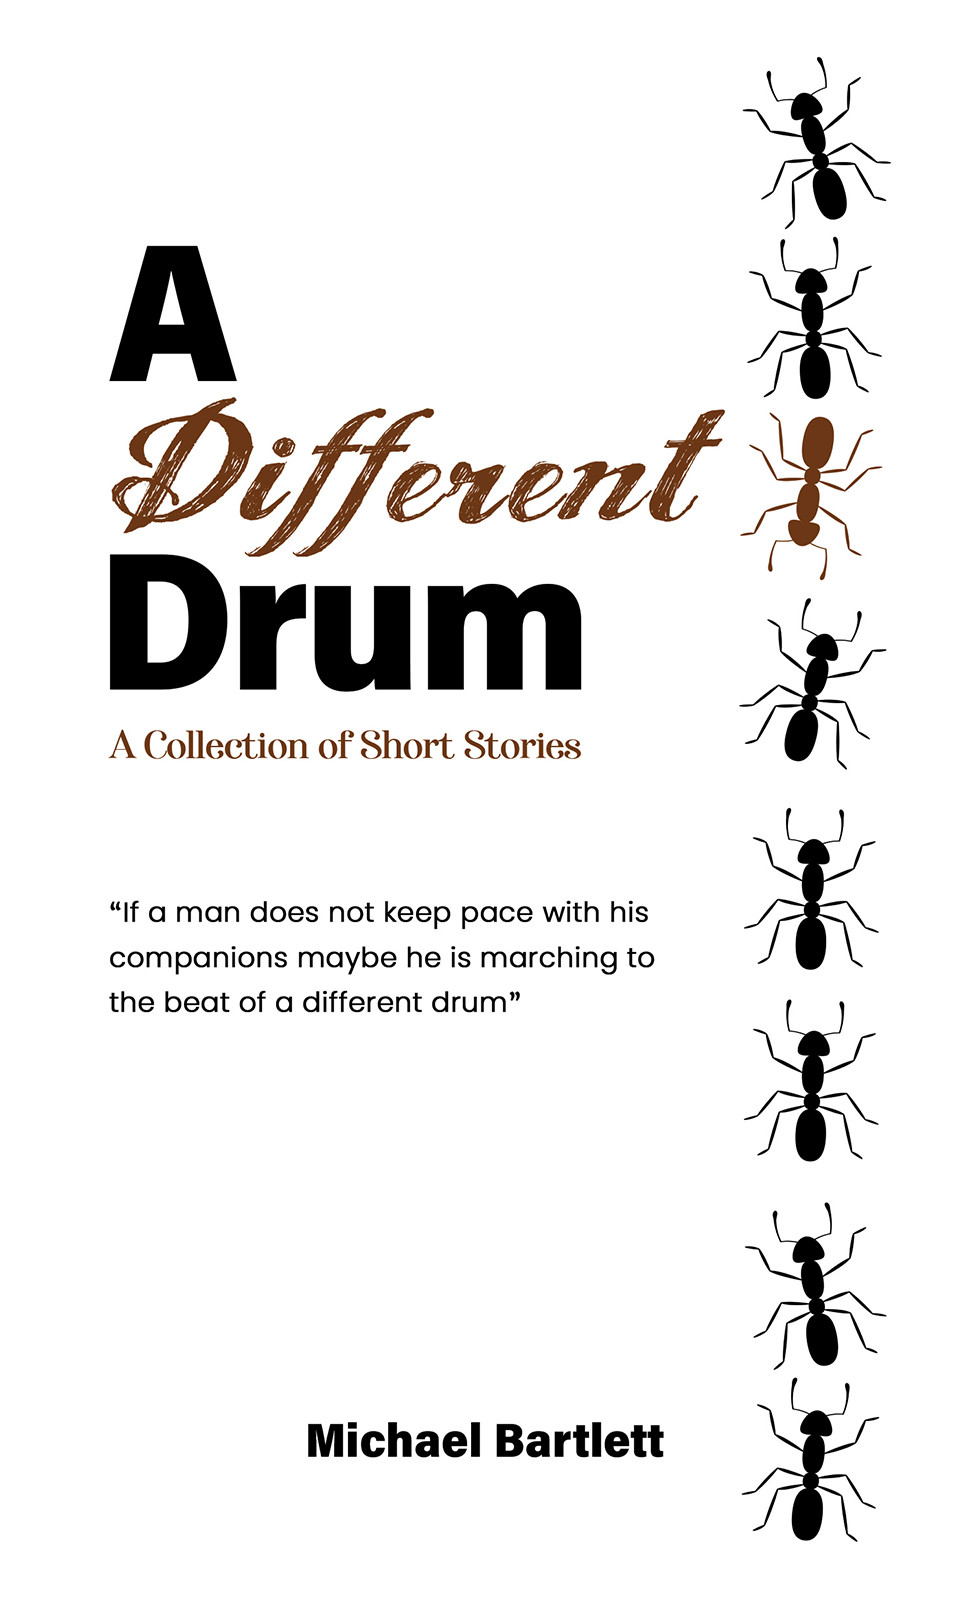 A Different Drum